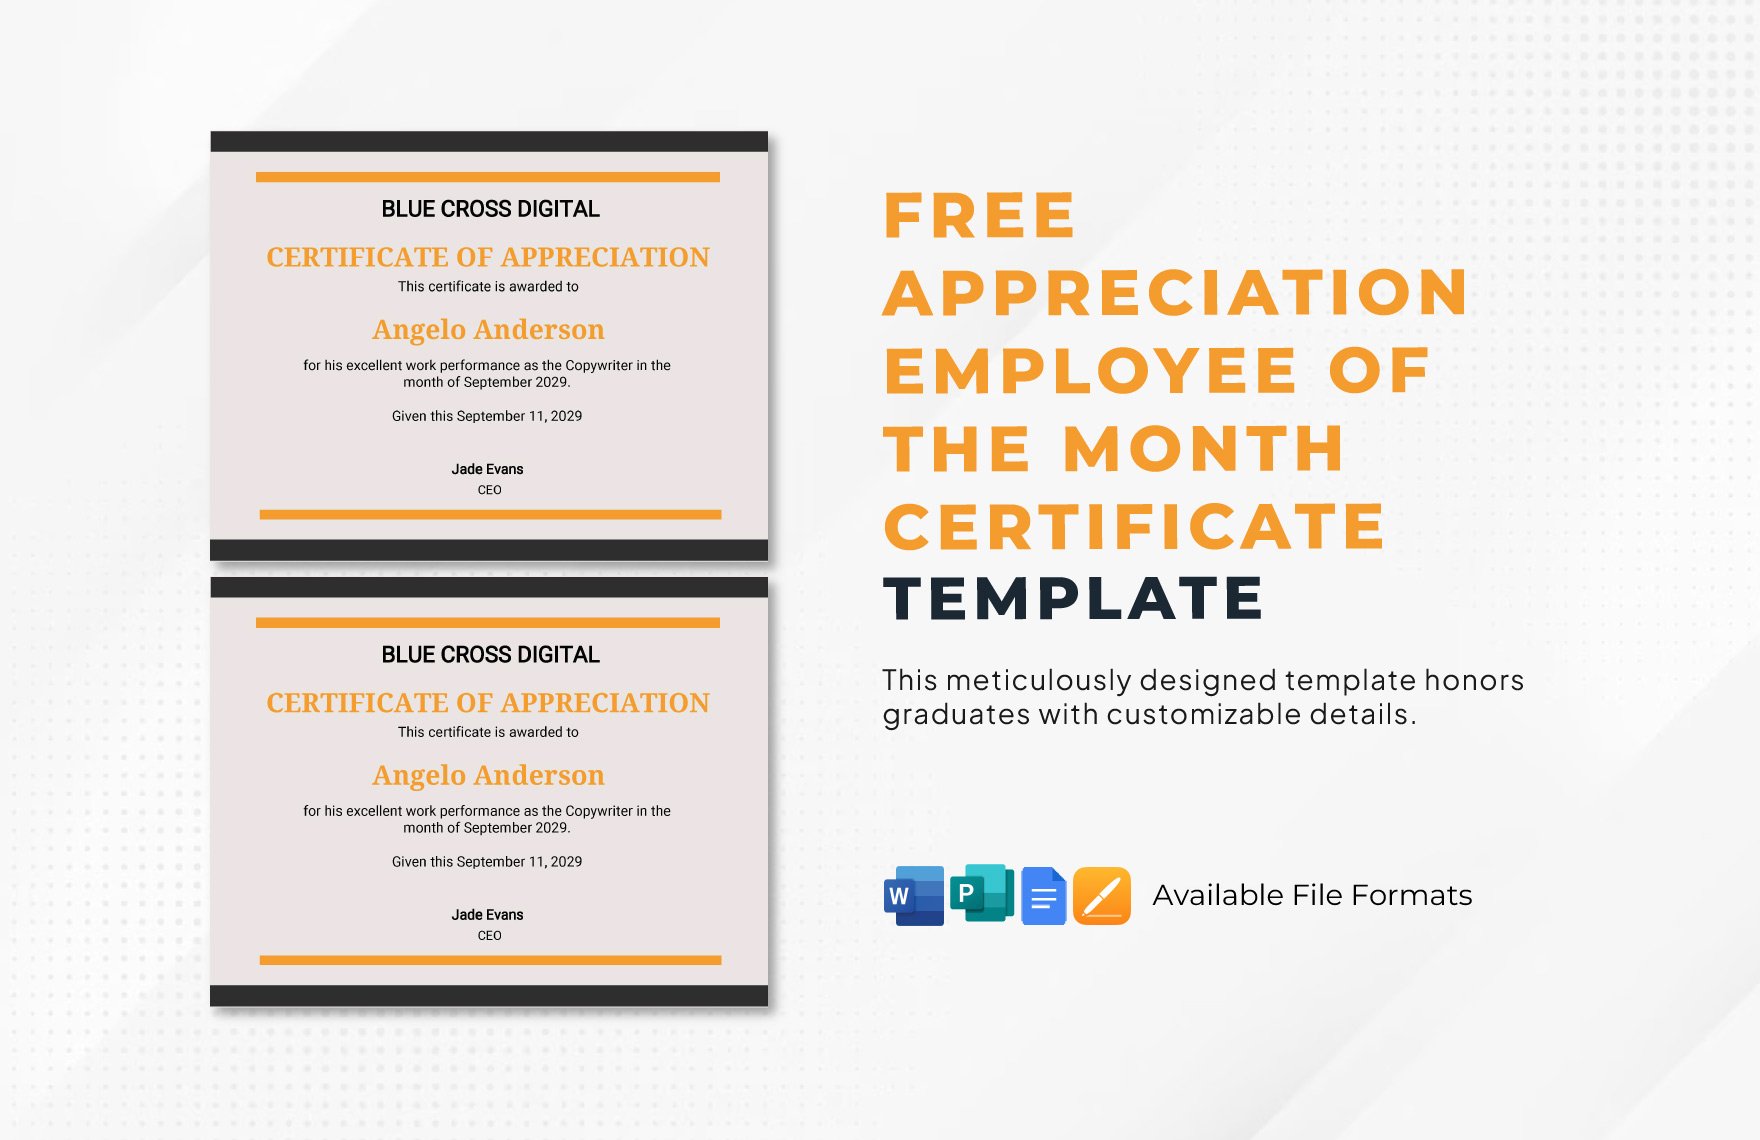 Appreciation Employee of the Month Certificate Template